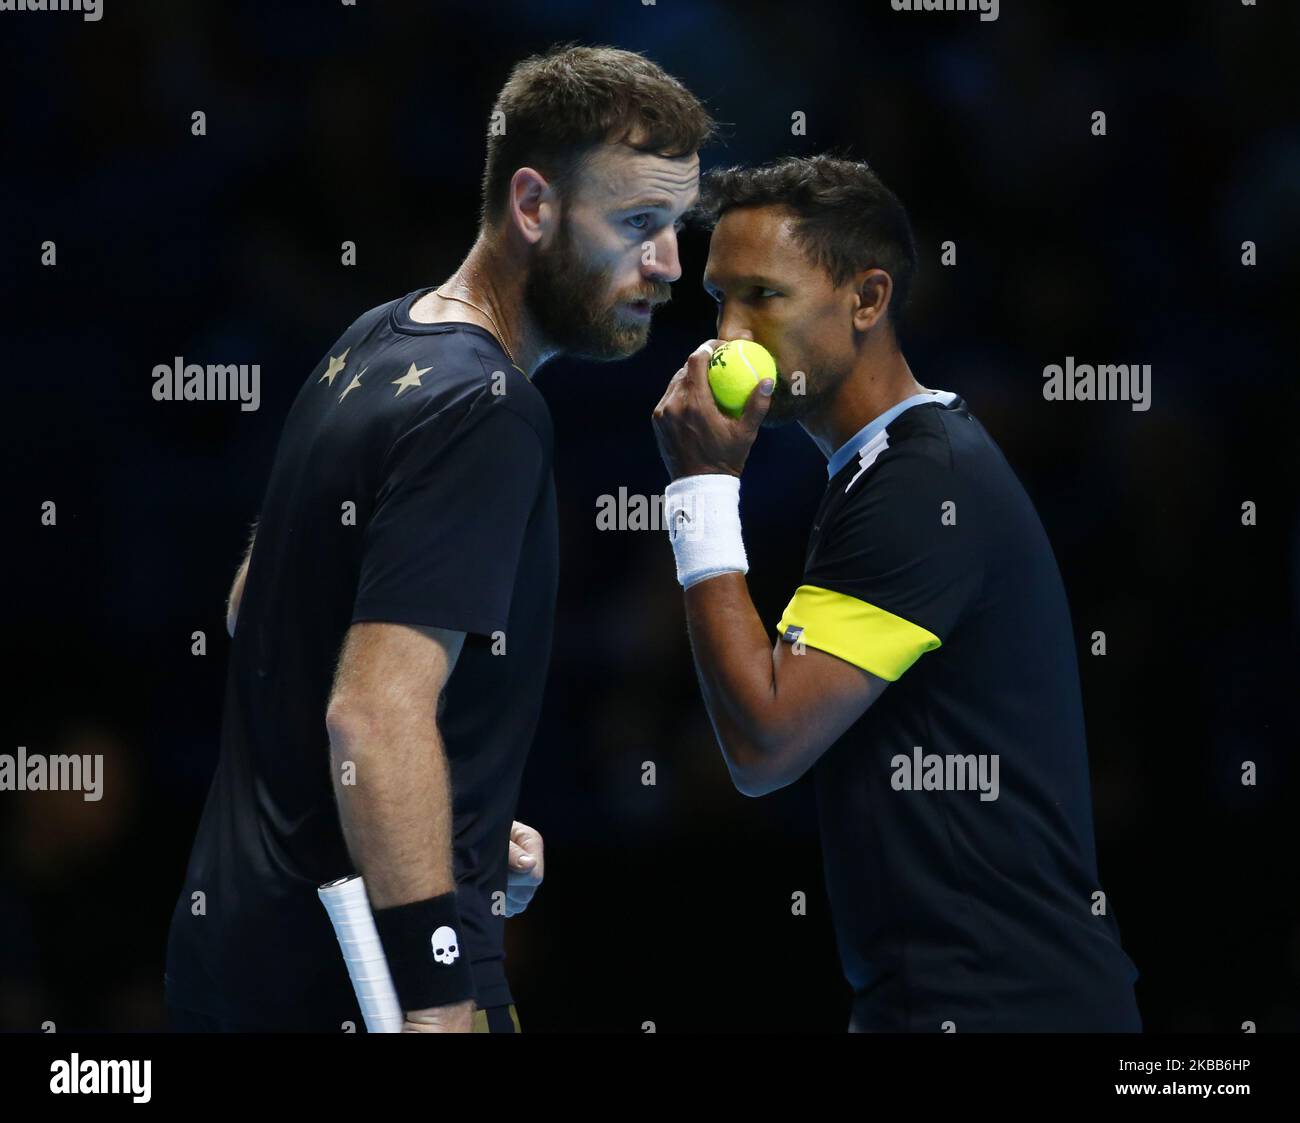 L-R Raven Klaasen( RSA) and Michael Venus (NZL) during Doubles Championship Final match Pierre-Hughes Herbert and Nicolas Mahut (FRA) against Raven Klaasen( RSA) and Michael Venus (NZL) International Tennis - Nitto ATP World Tour Finals Day 8 - Tuesday 17th November 2019 - O2 Arena - London (Photo by Action Foto Sport/NurPhoto) Stock Photo